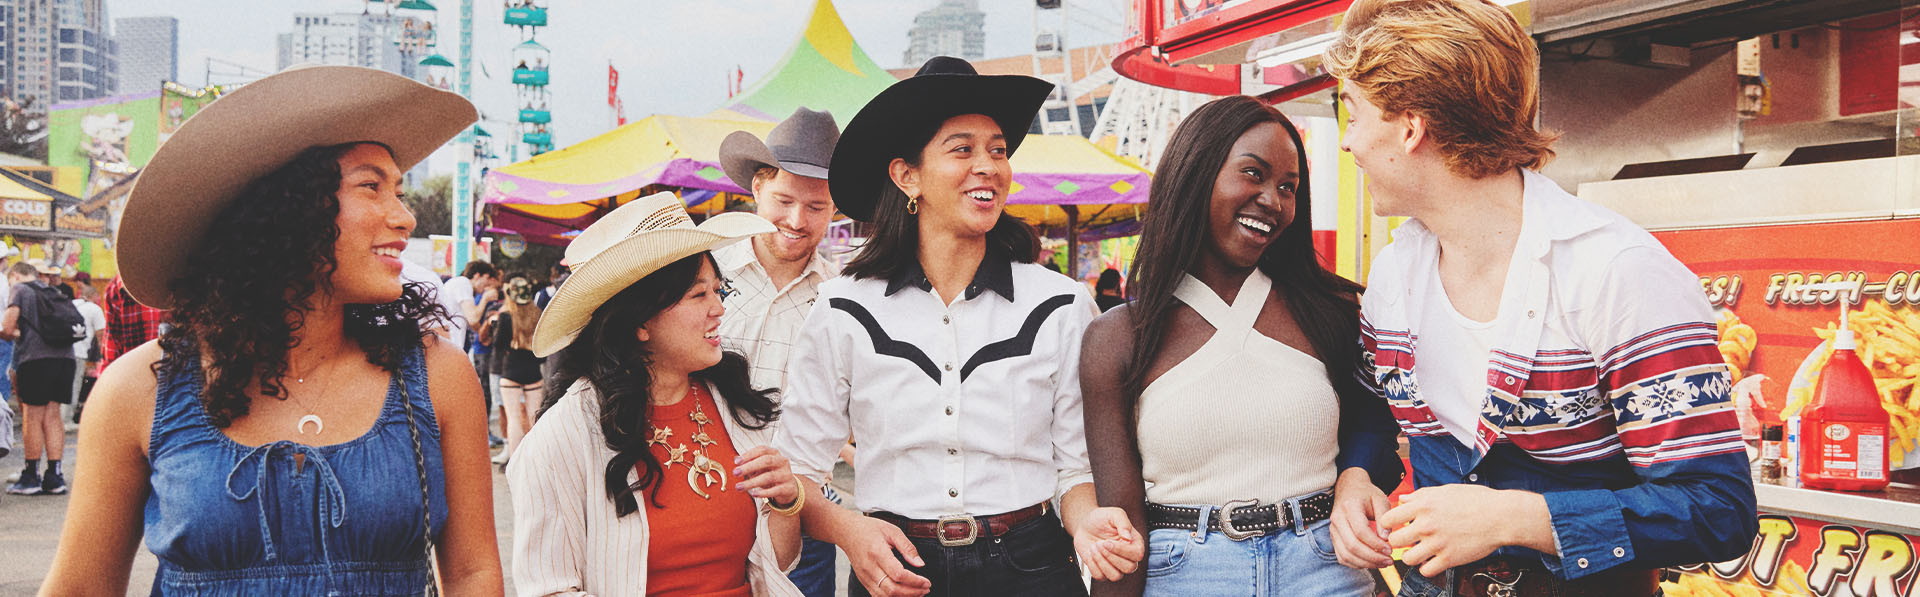 group of friends exploring the Calgary Stampede grounds